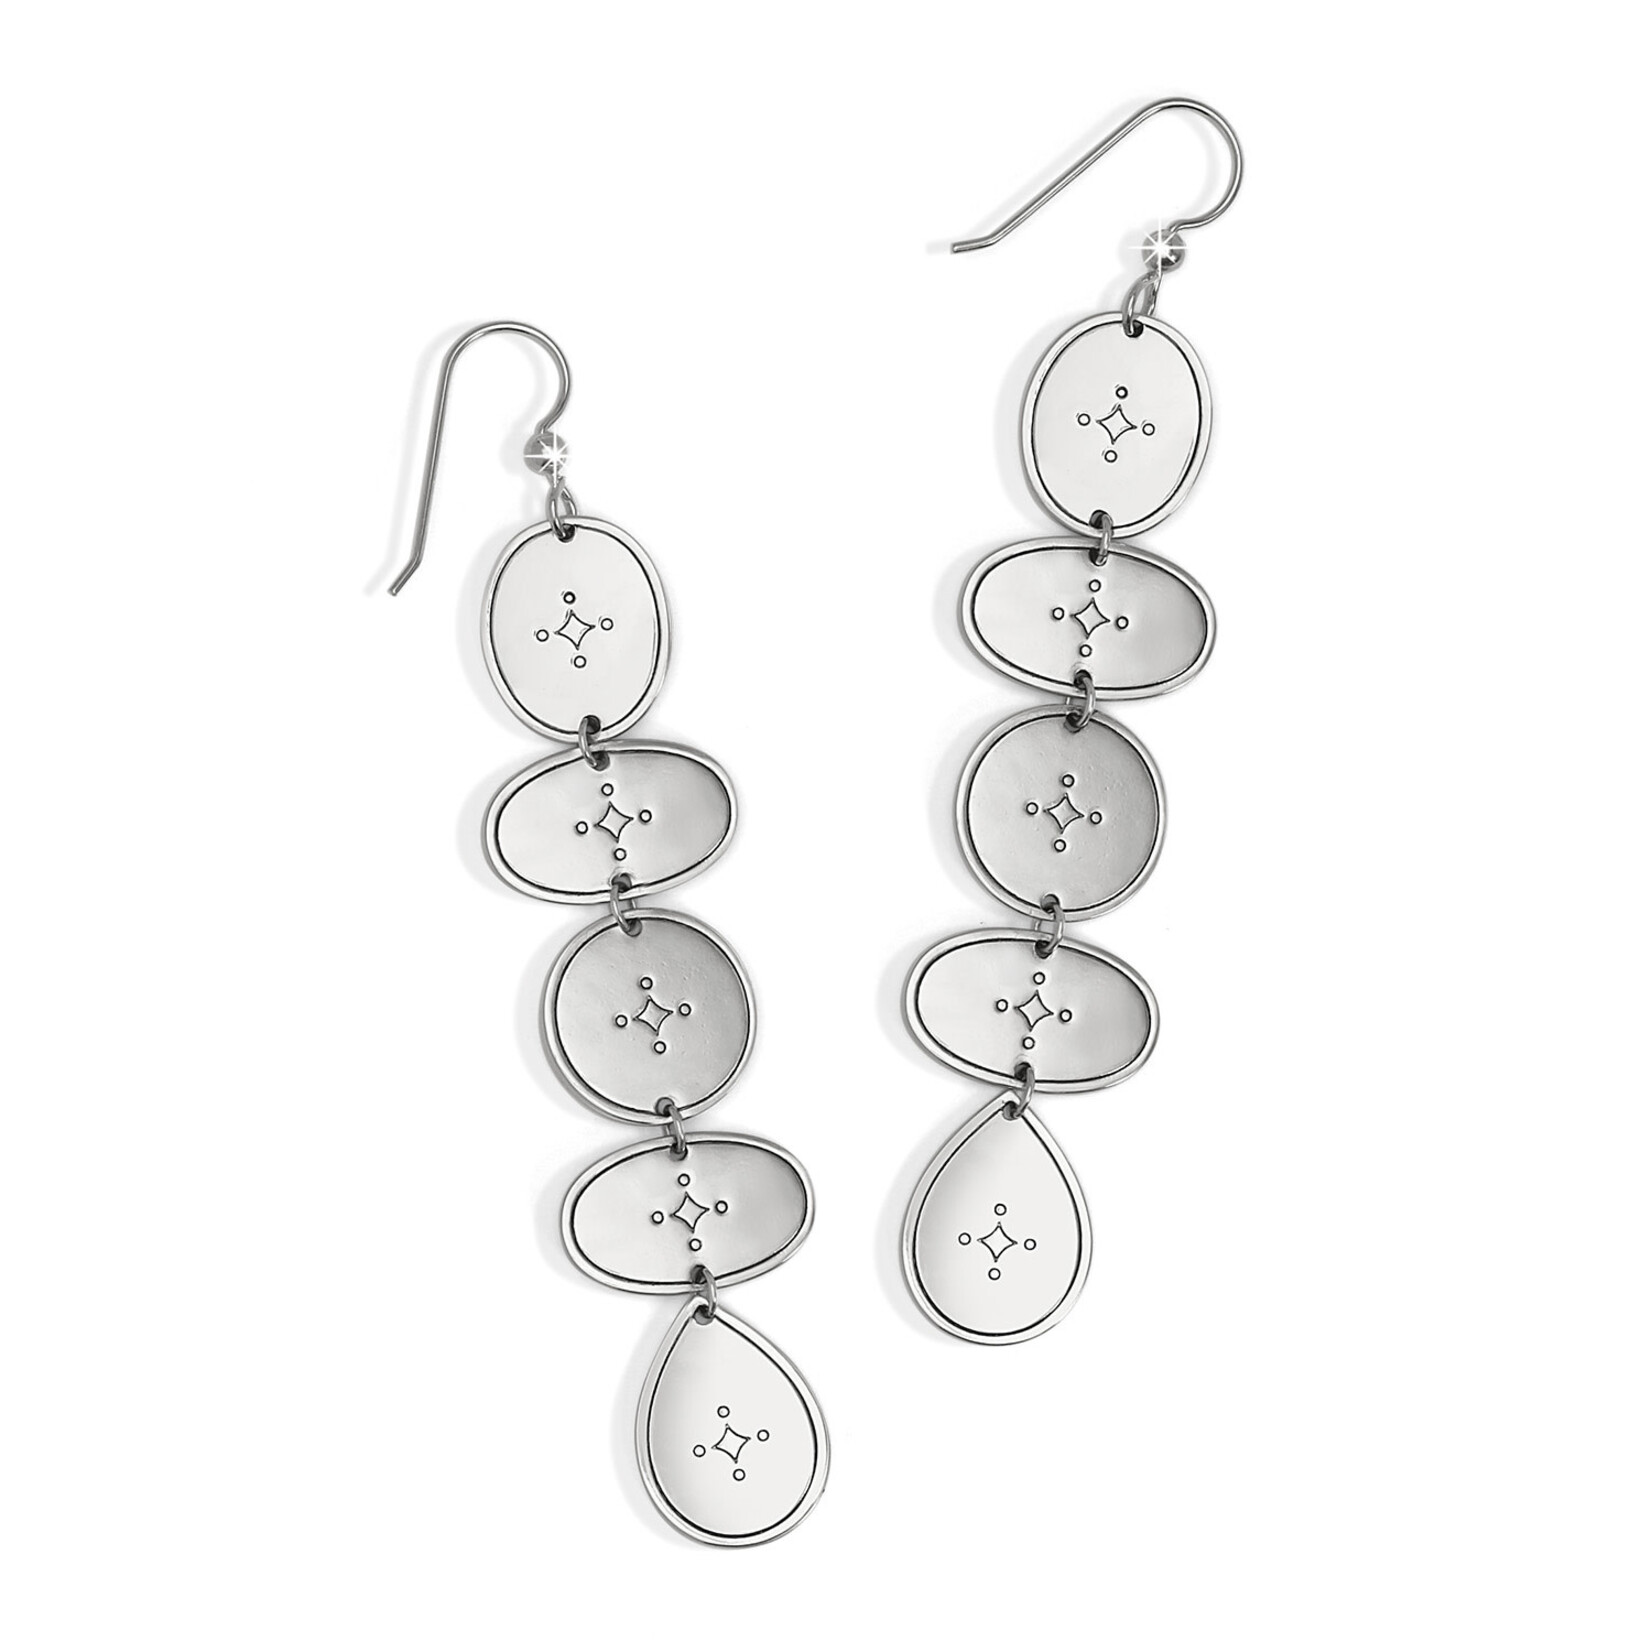 Brighton Palm Canyon Long French Wire Earrings - Silver